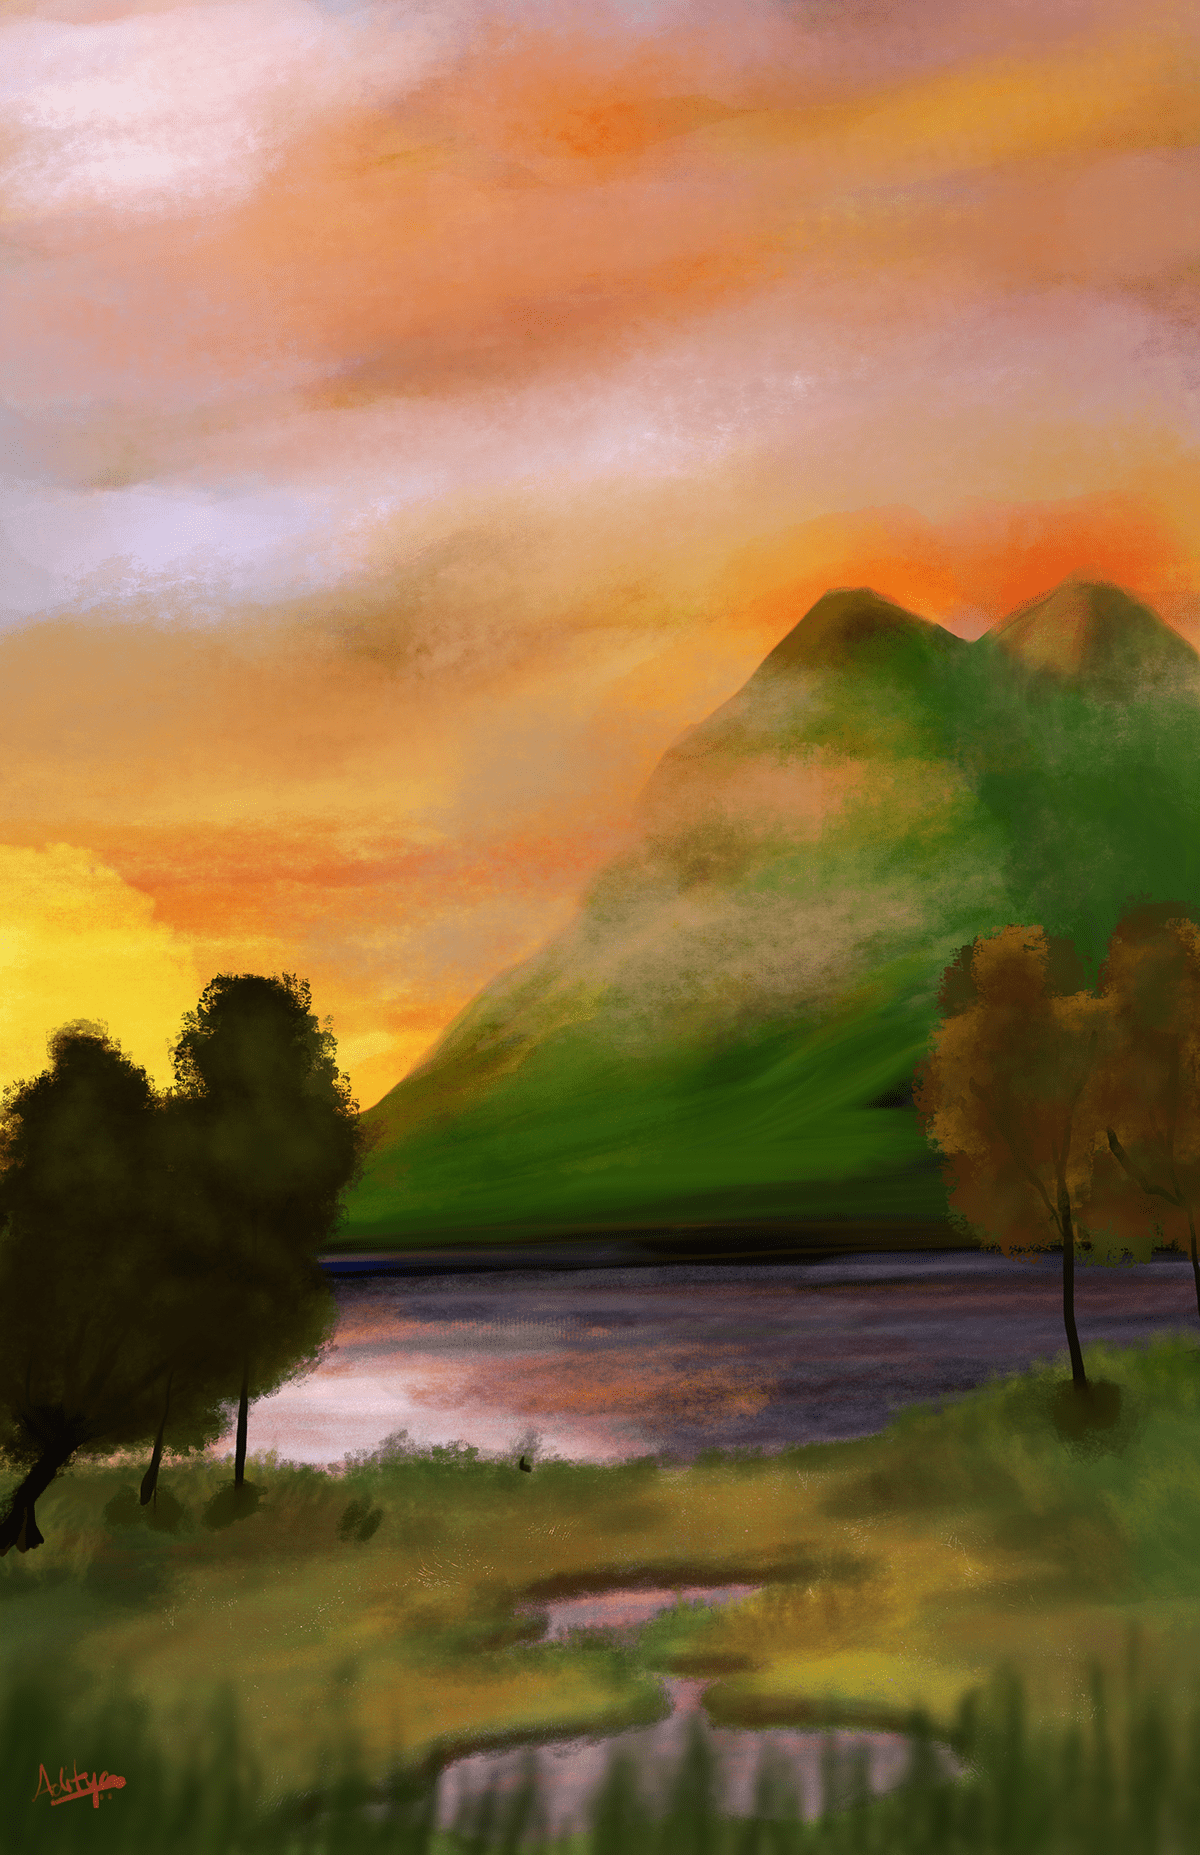 An Illustration of a Hill side lake views with beautiful orange evening skies 